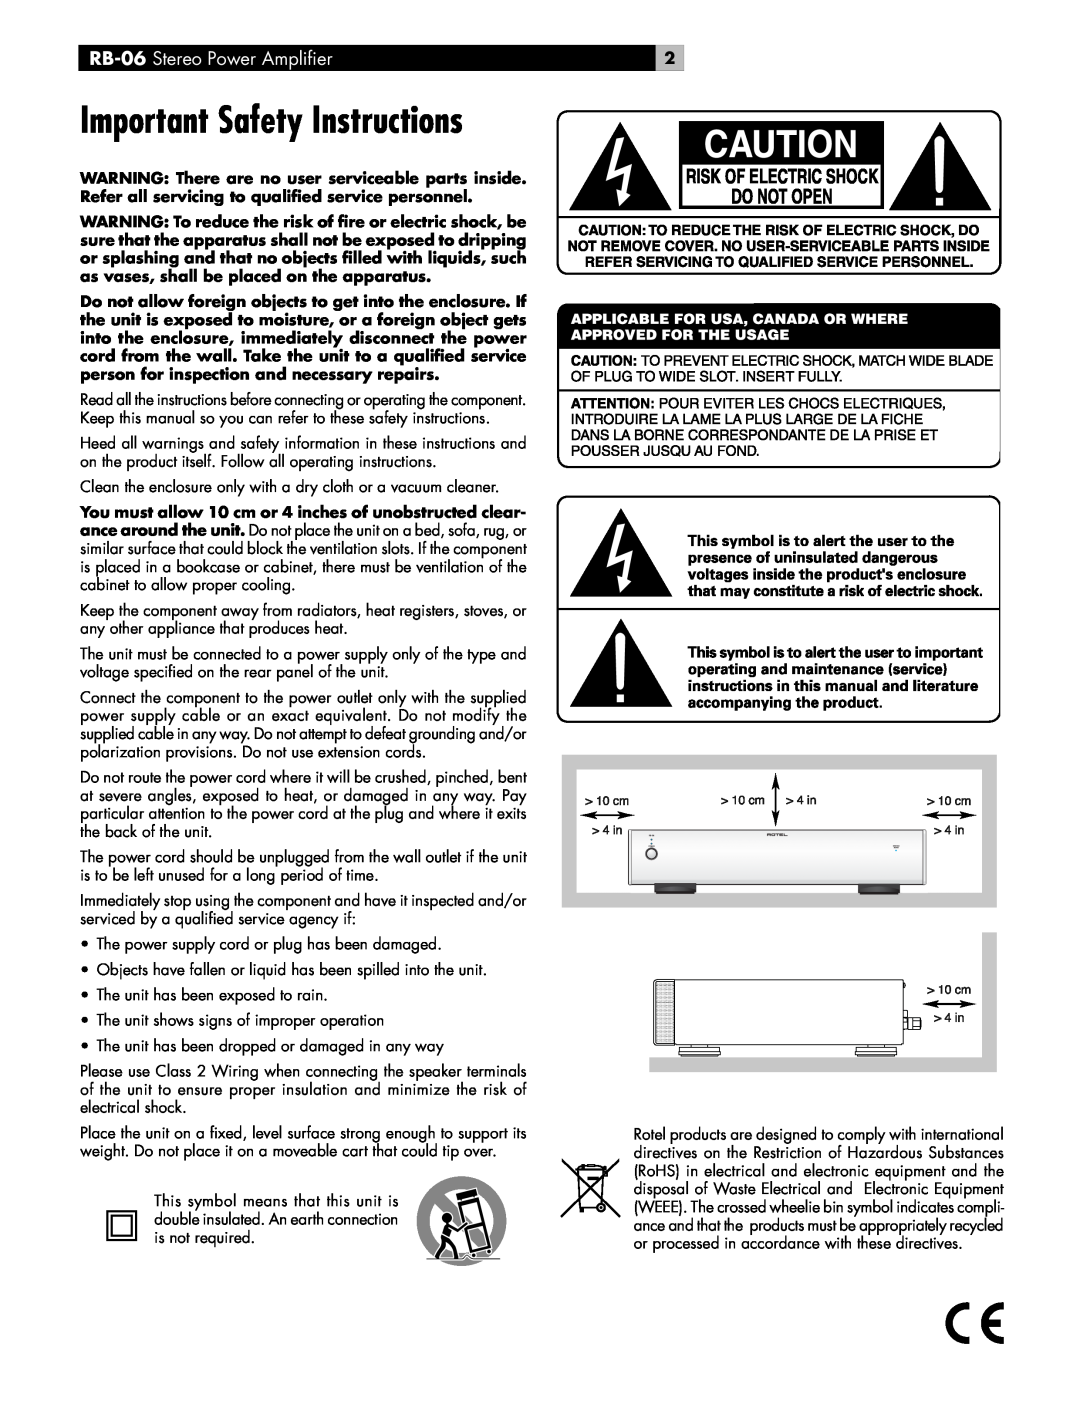 Rotel owner manual Important Safety Instructions, RB-06 Stereo Power Ampliﬁer 